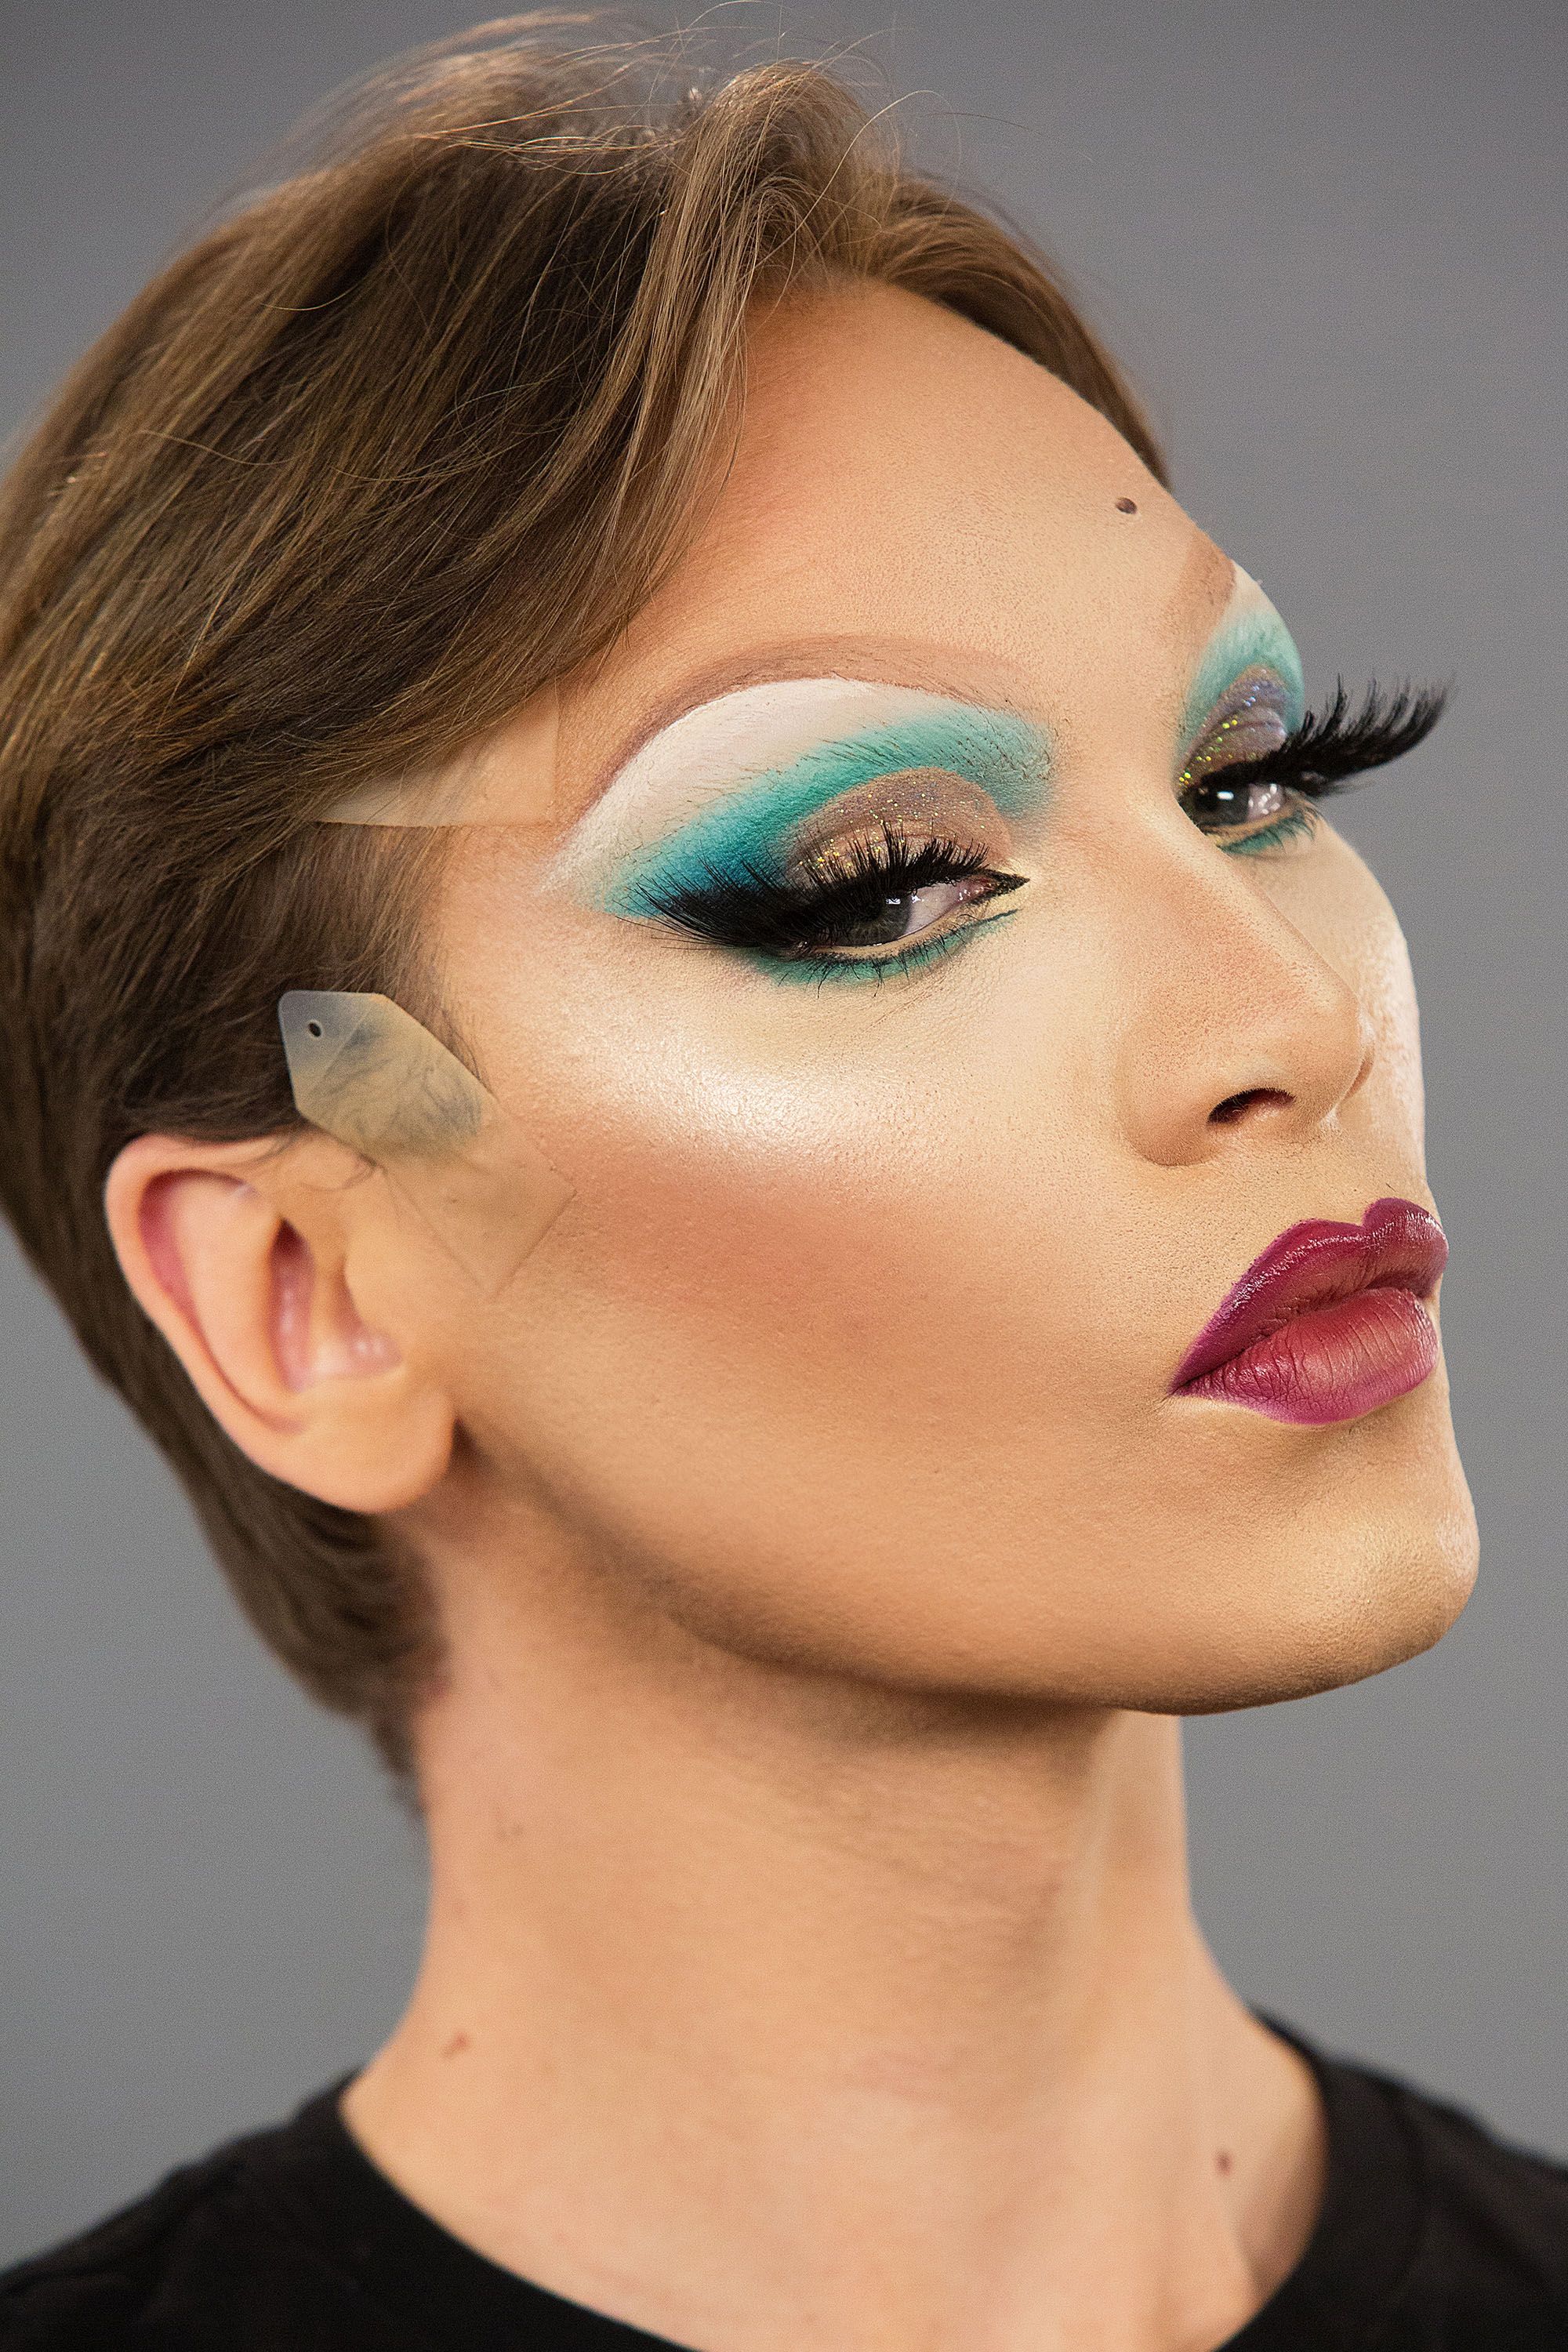 10 Life-Changing Hacks From Queen Miss Fame